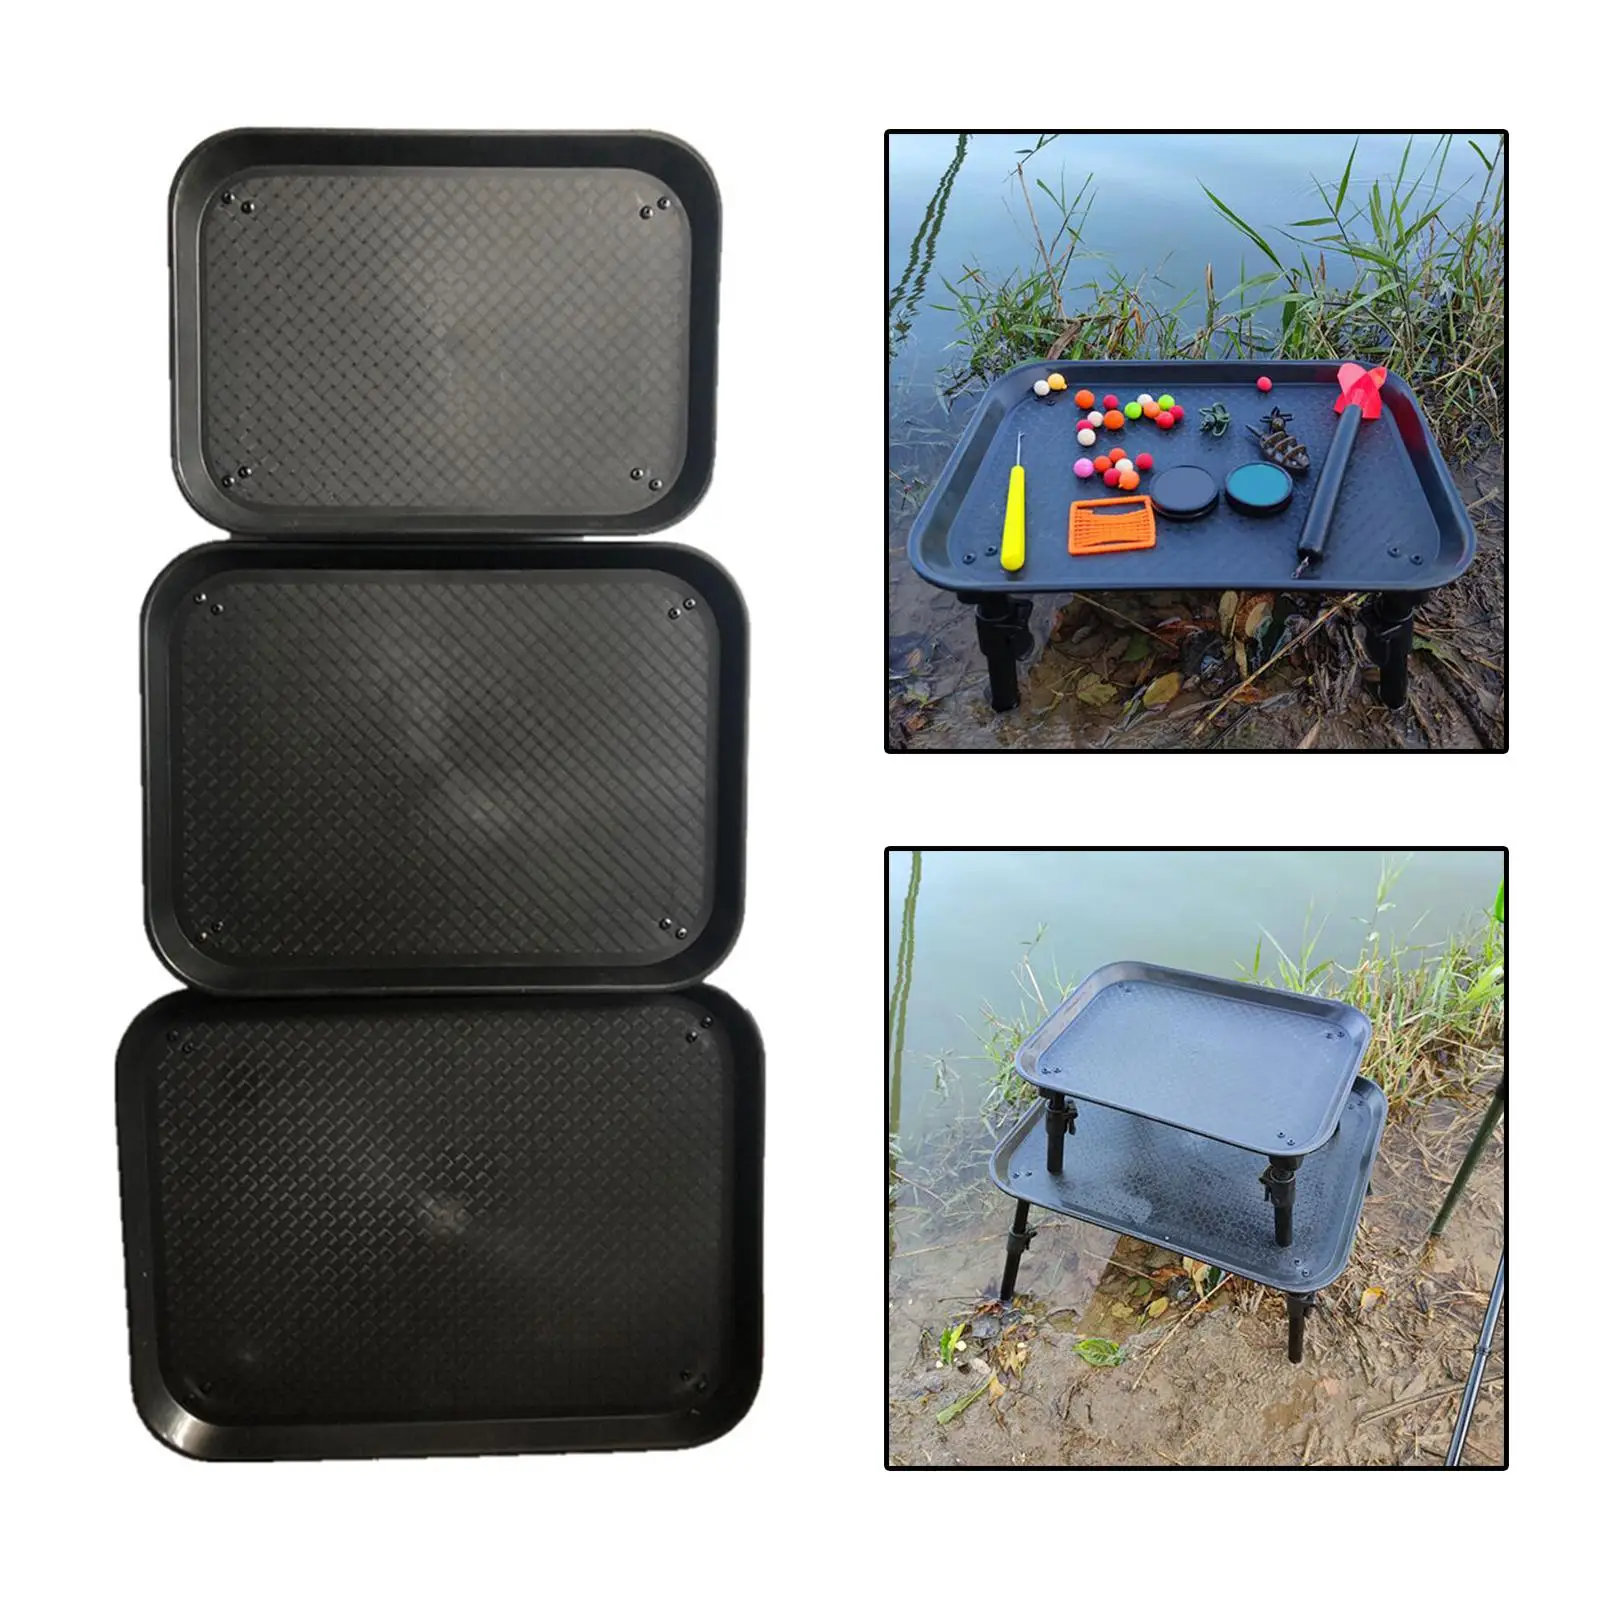 Folding Table Dining Tables Durable Multifunctional Portable Outdoor Collapsible Desk for Beach Fishing Hiking BBQ